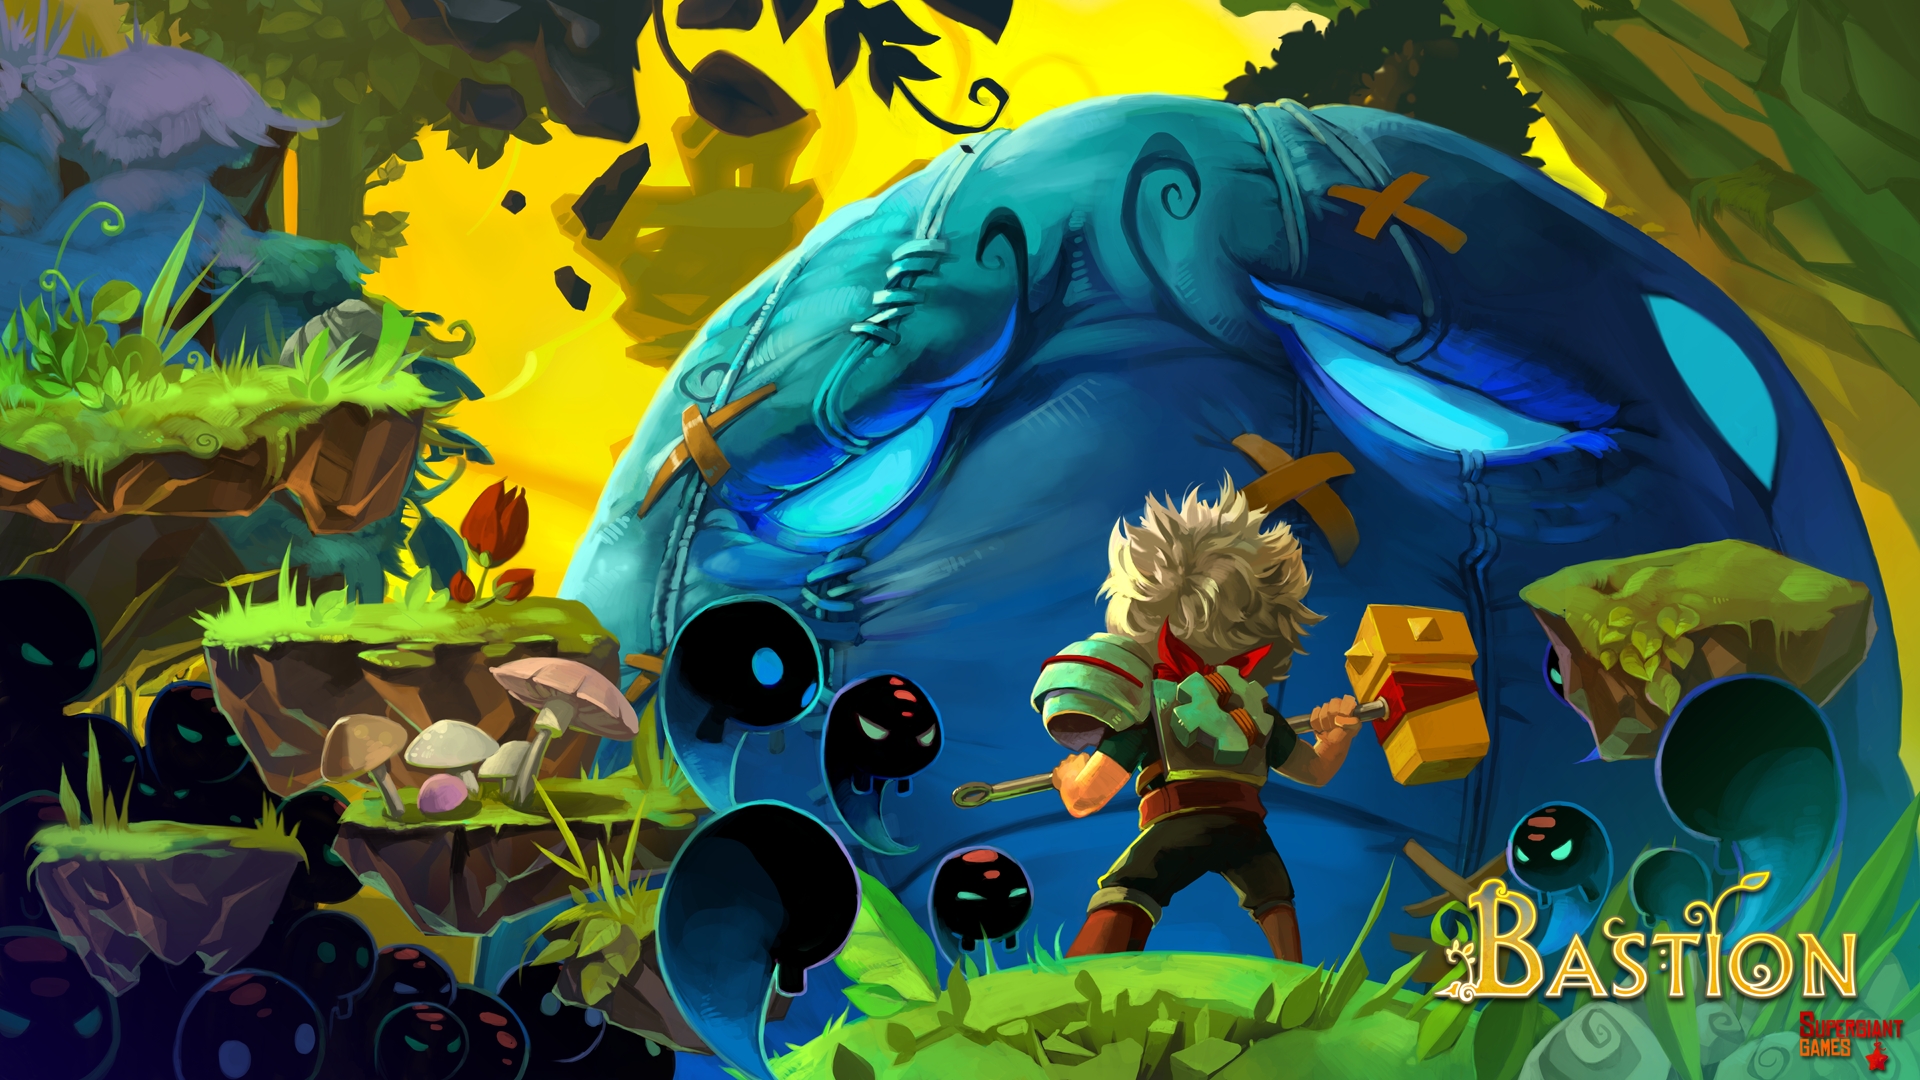 Bastion coming to Xbox One